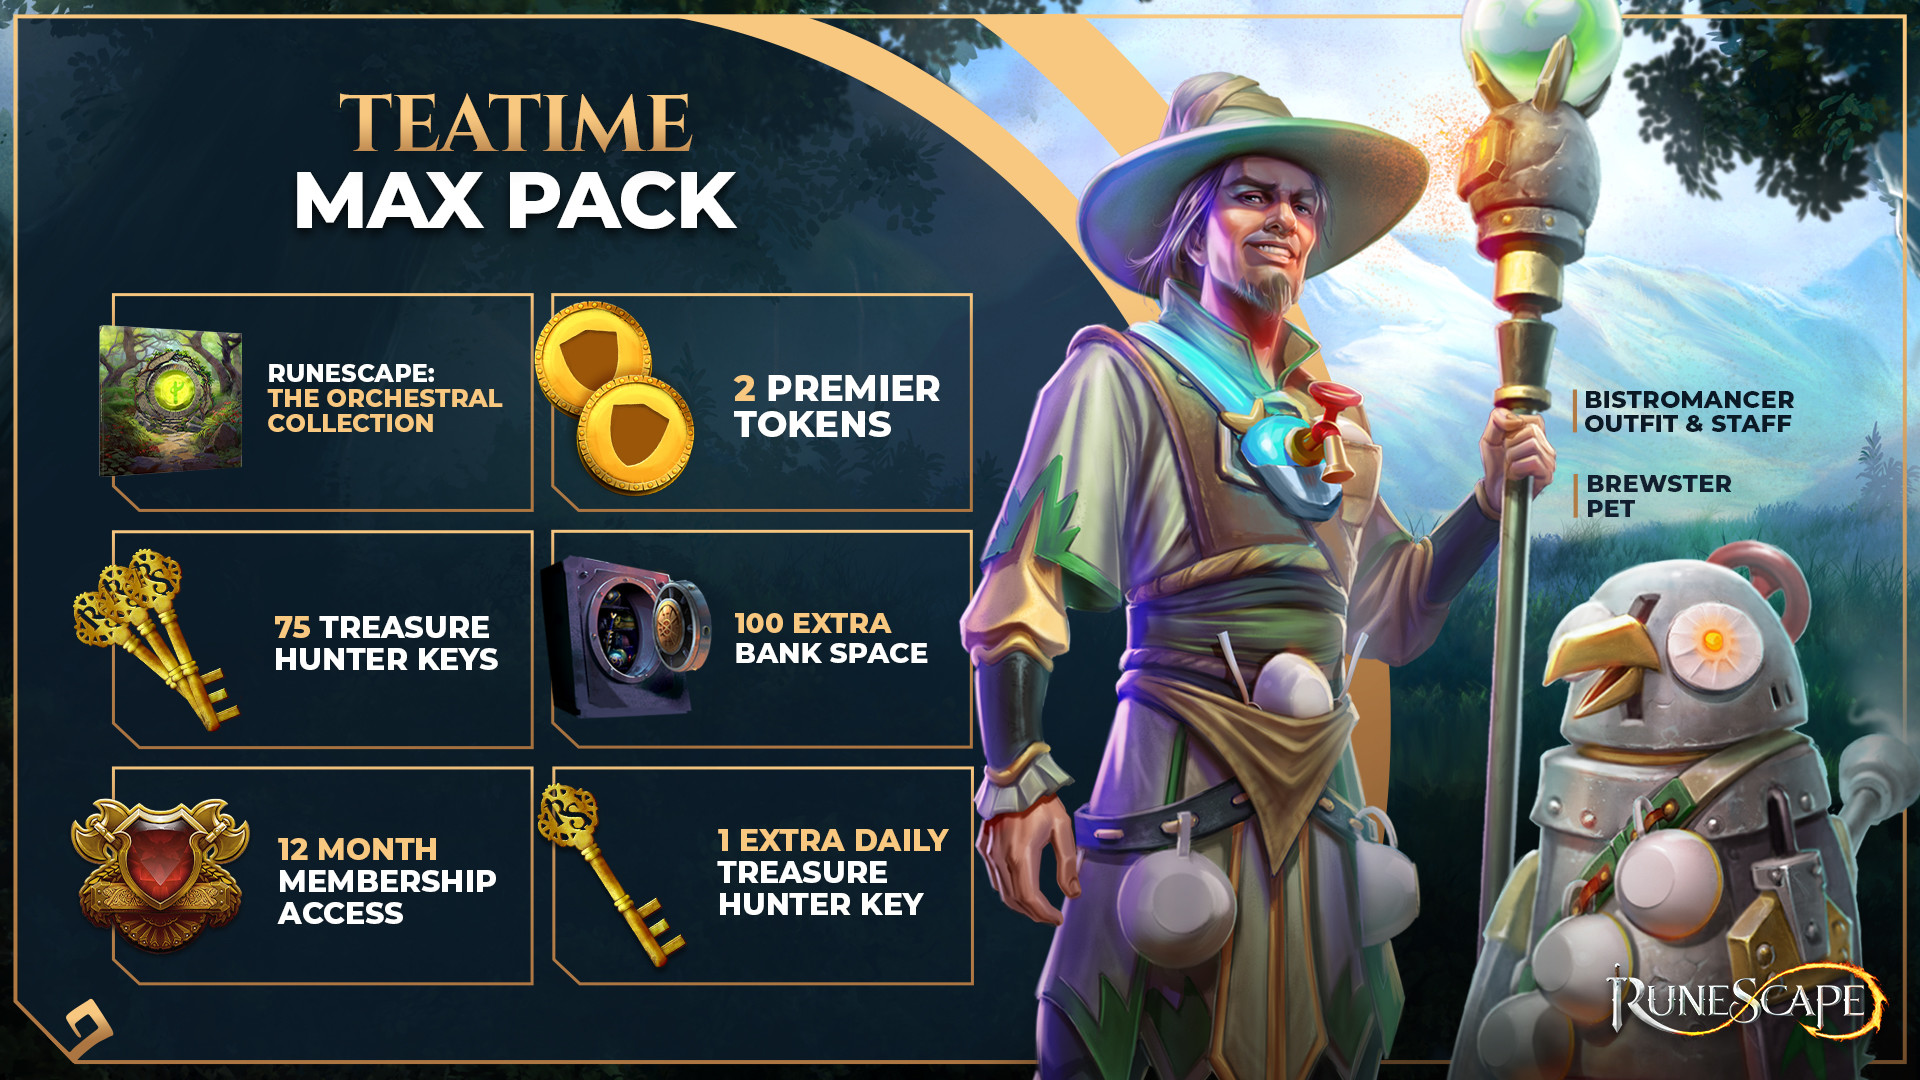 Runescape - Max Pack + 12 Months Membership Manual Delivery 56.49$